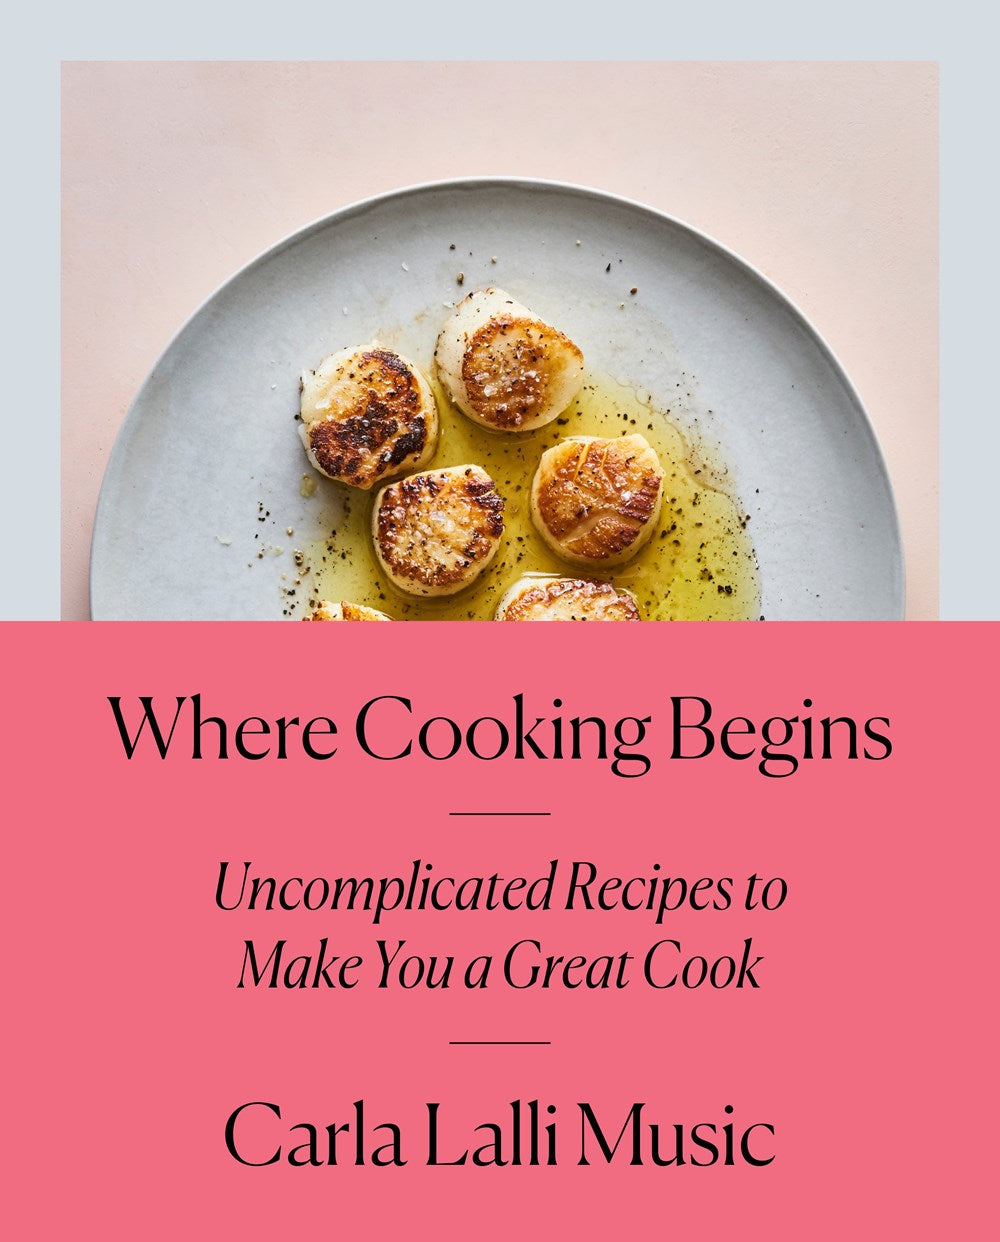 Where Cooking Begins: Uncomplicated Recipes to Make You a Great Cook by Carla Lalli Music